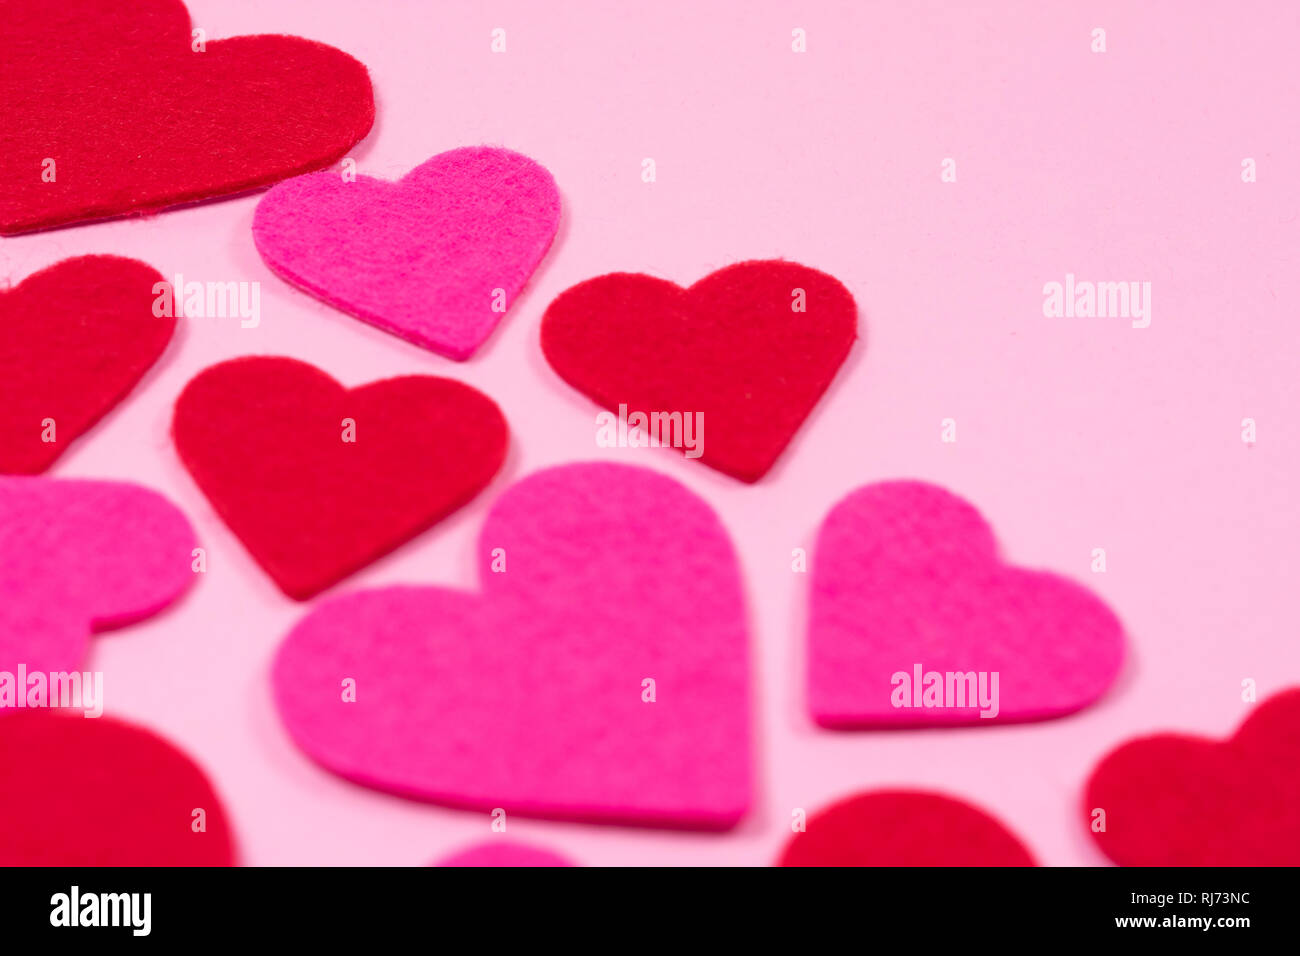 White Saint Valentine's day background with red and pink hearts, blurred focus, close-up view, copy space. Symbol of love, Love concept. Stock Photo